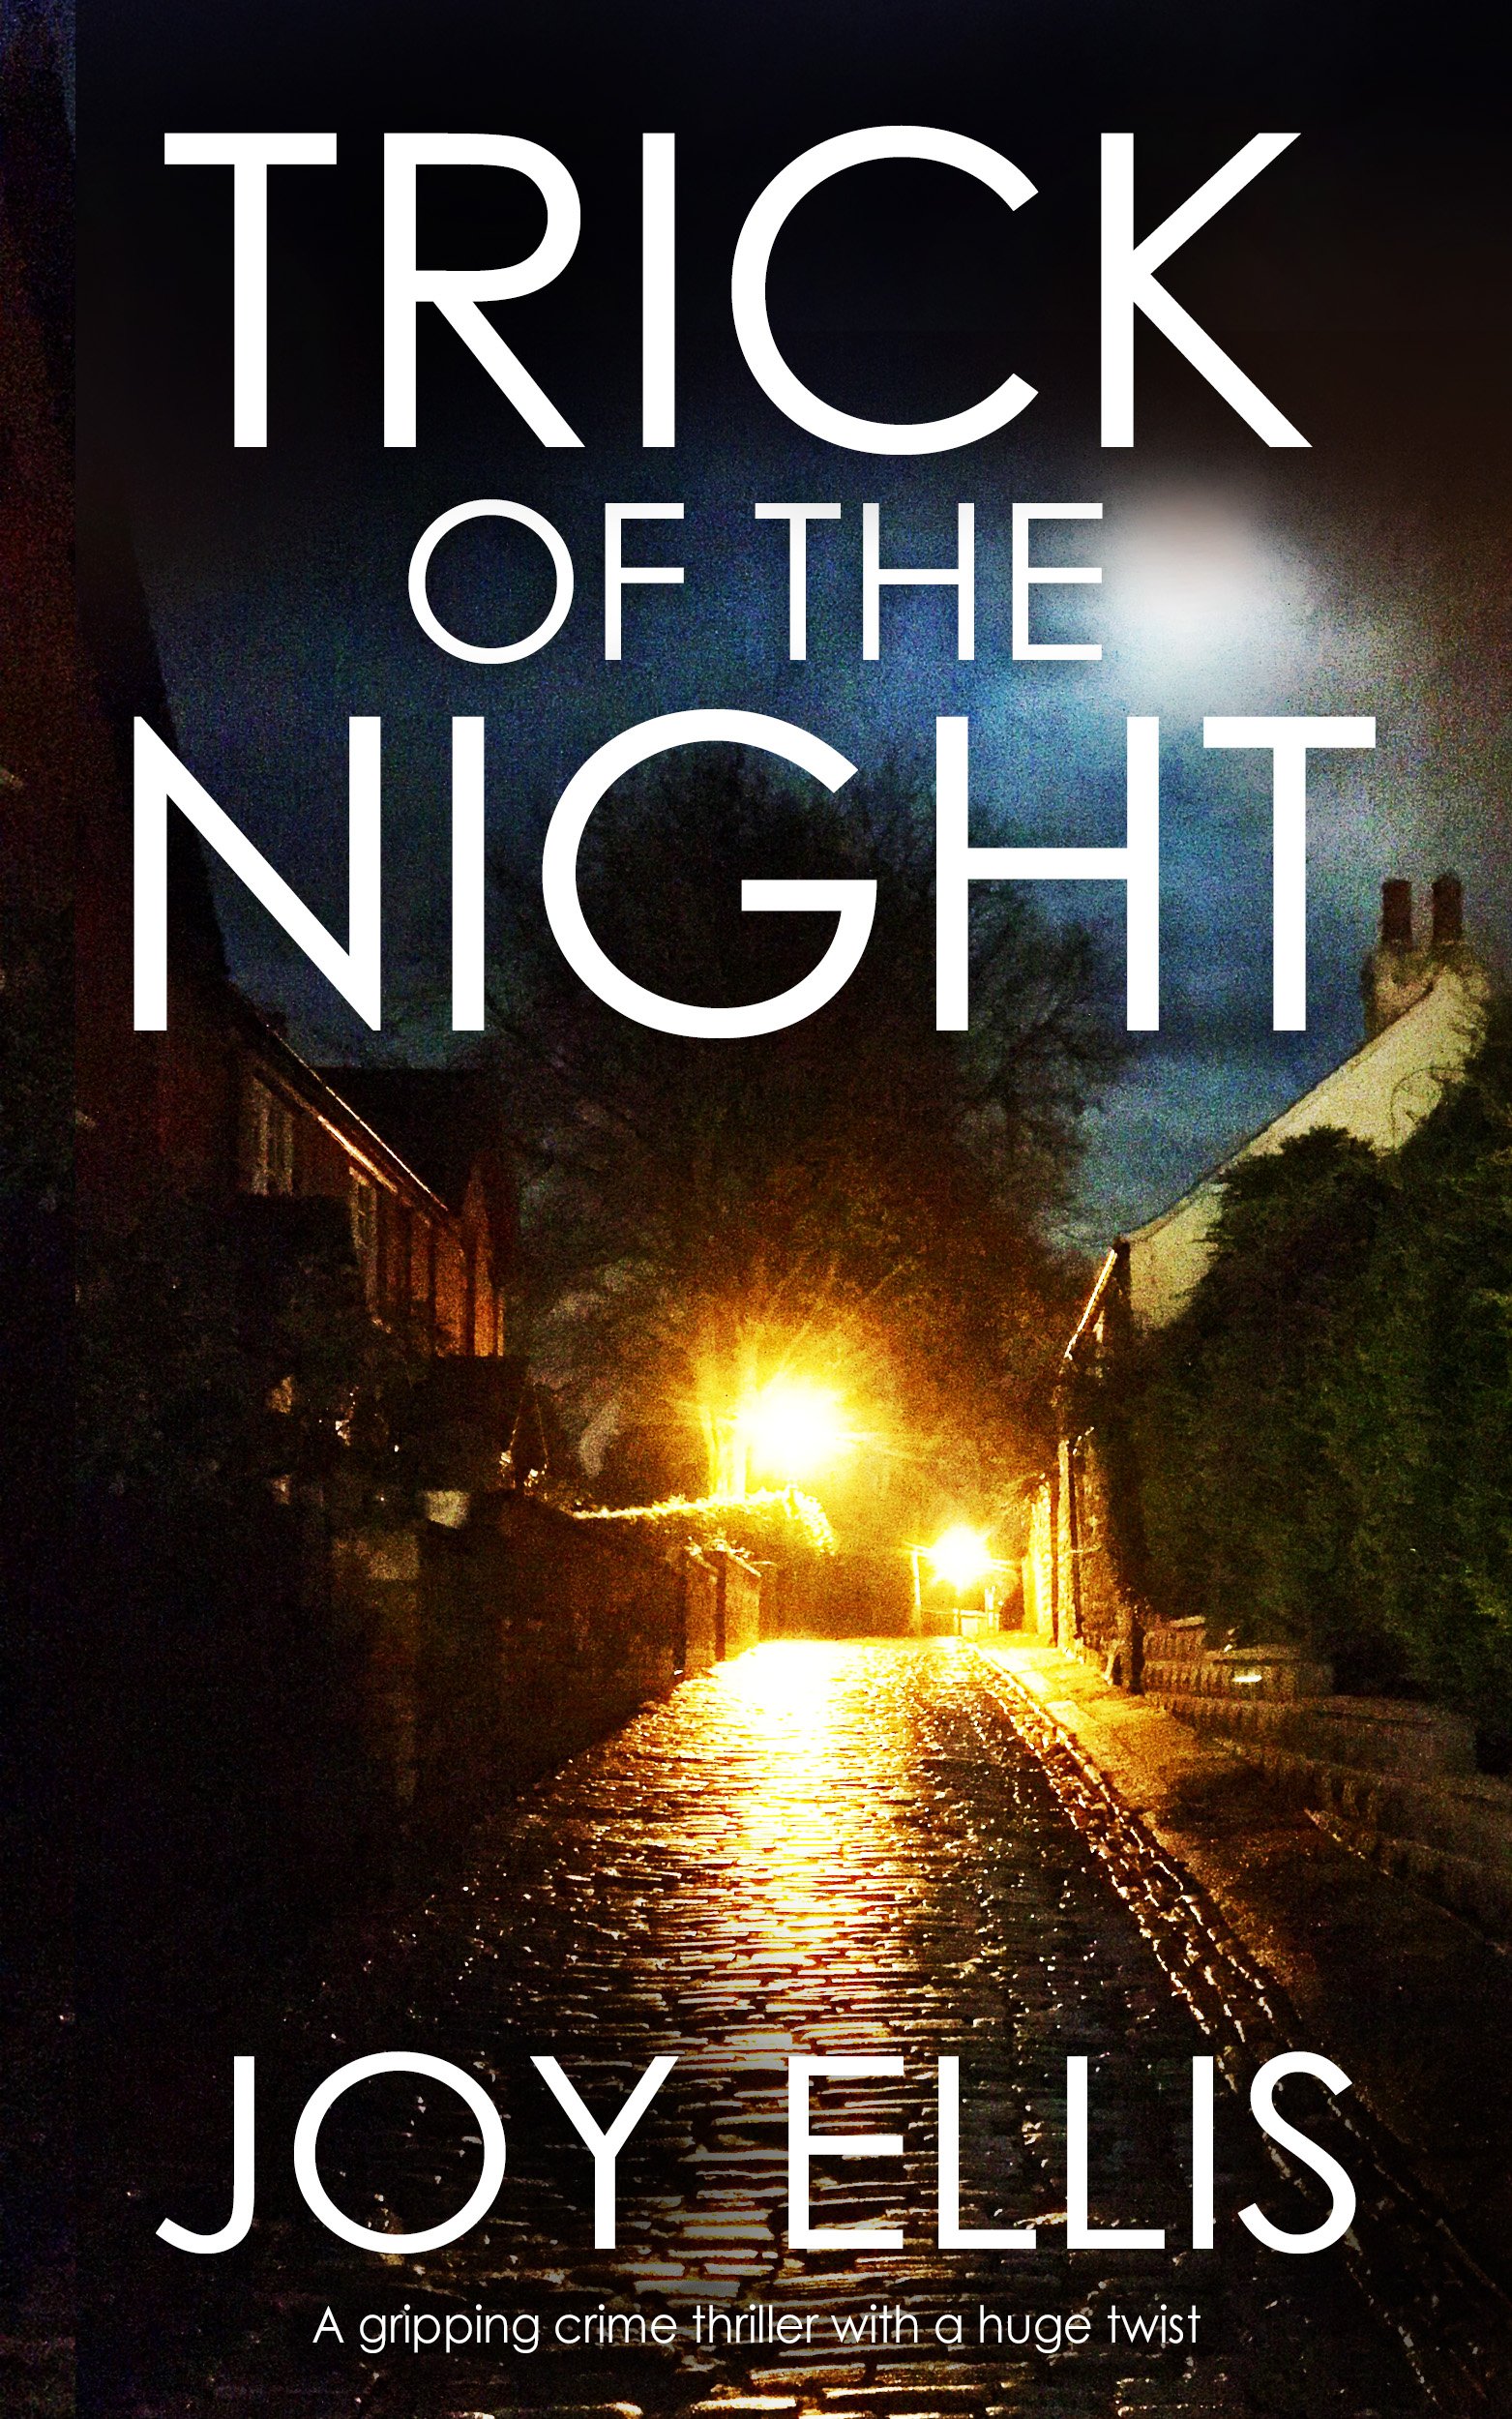 TRICK OF THE NIGHT Cover publish.jpg